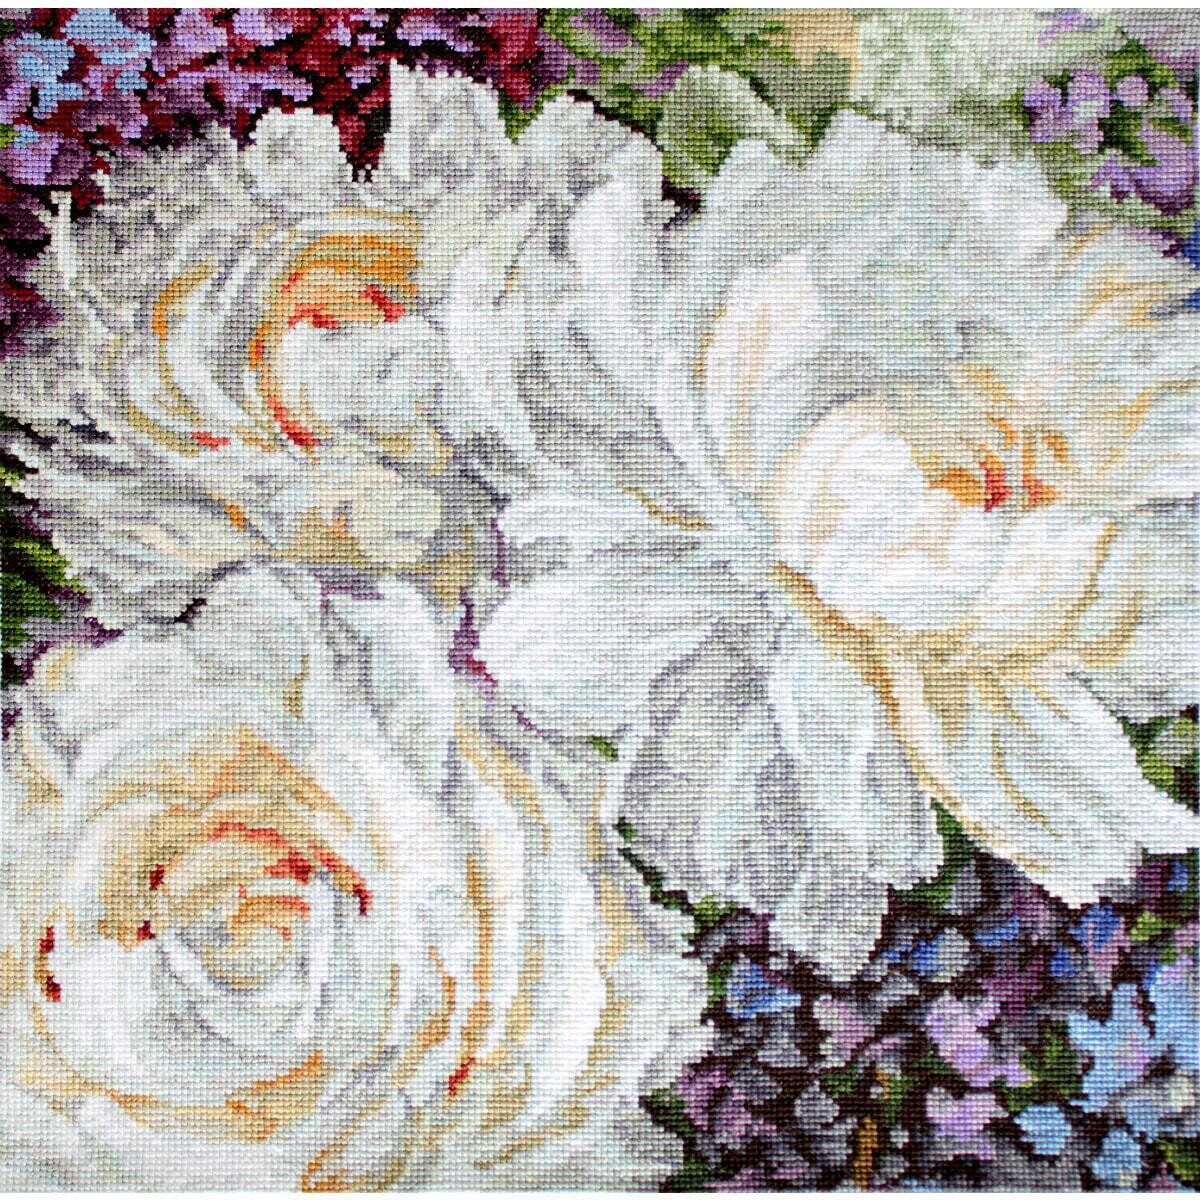 Letistitch counted cross stitch kit "White...